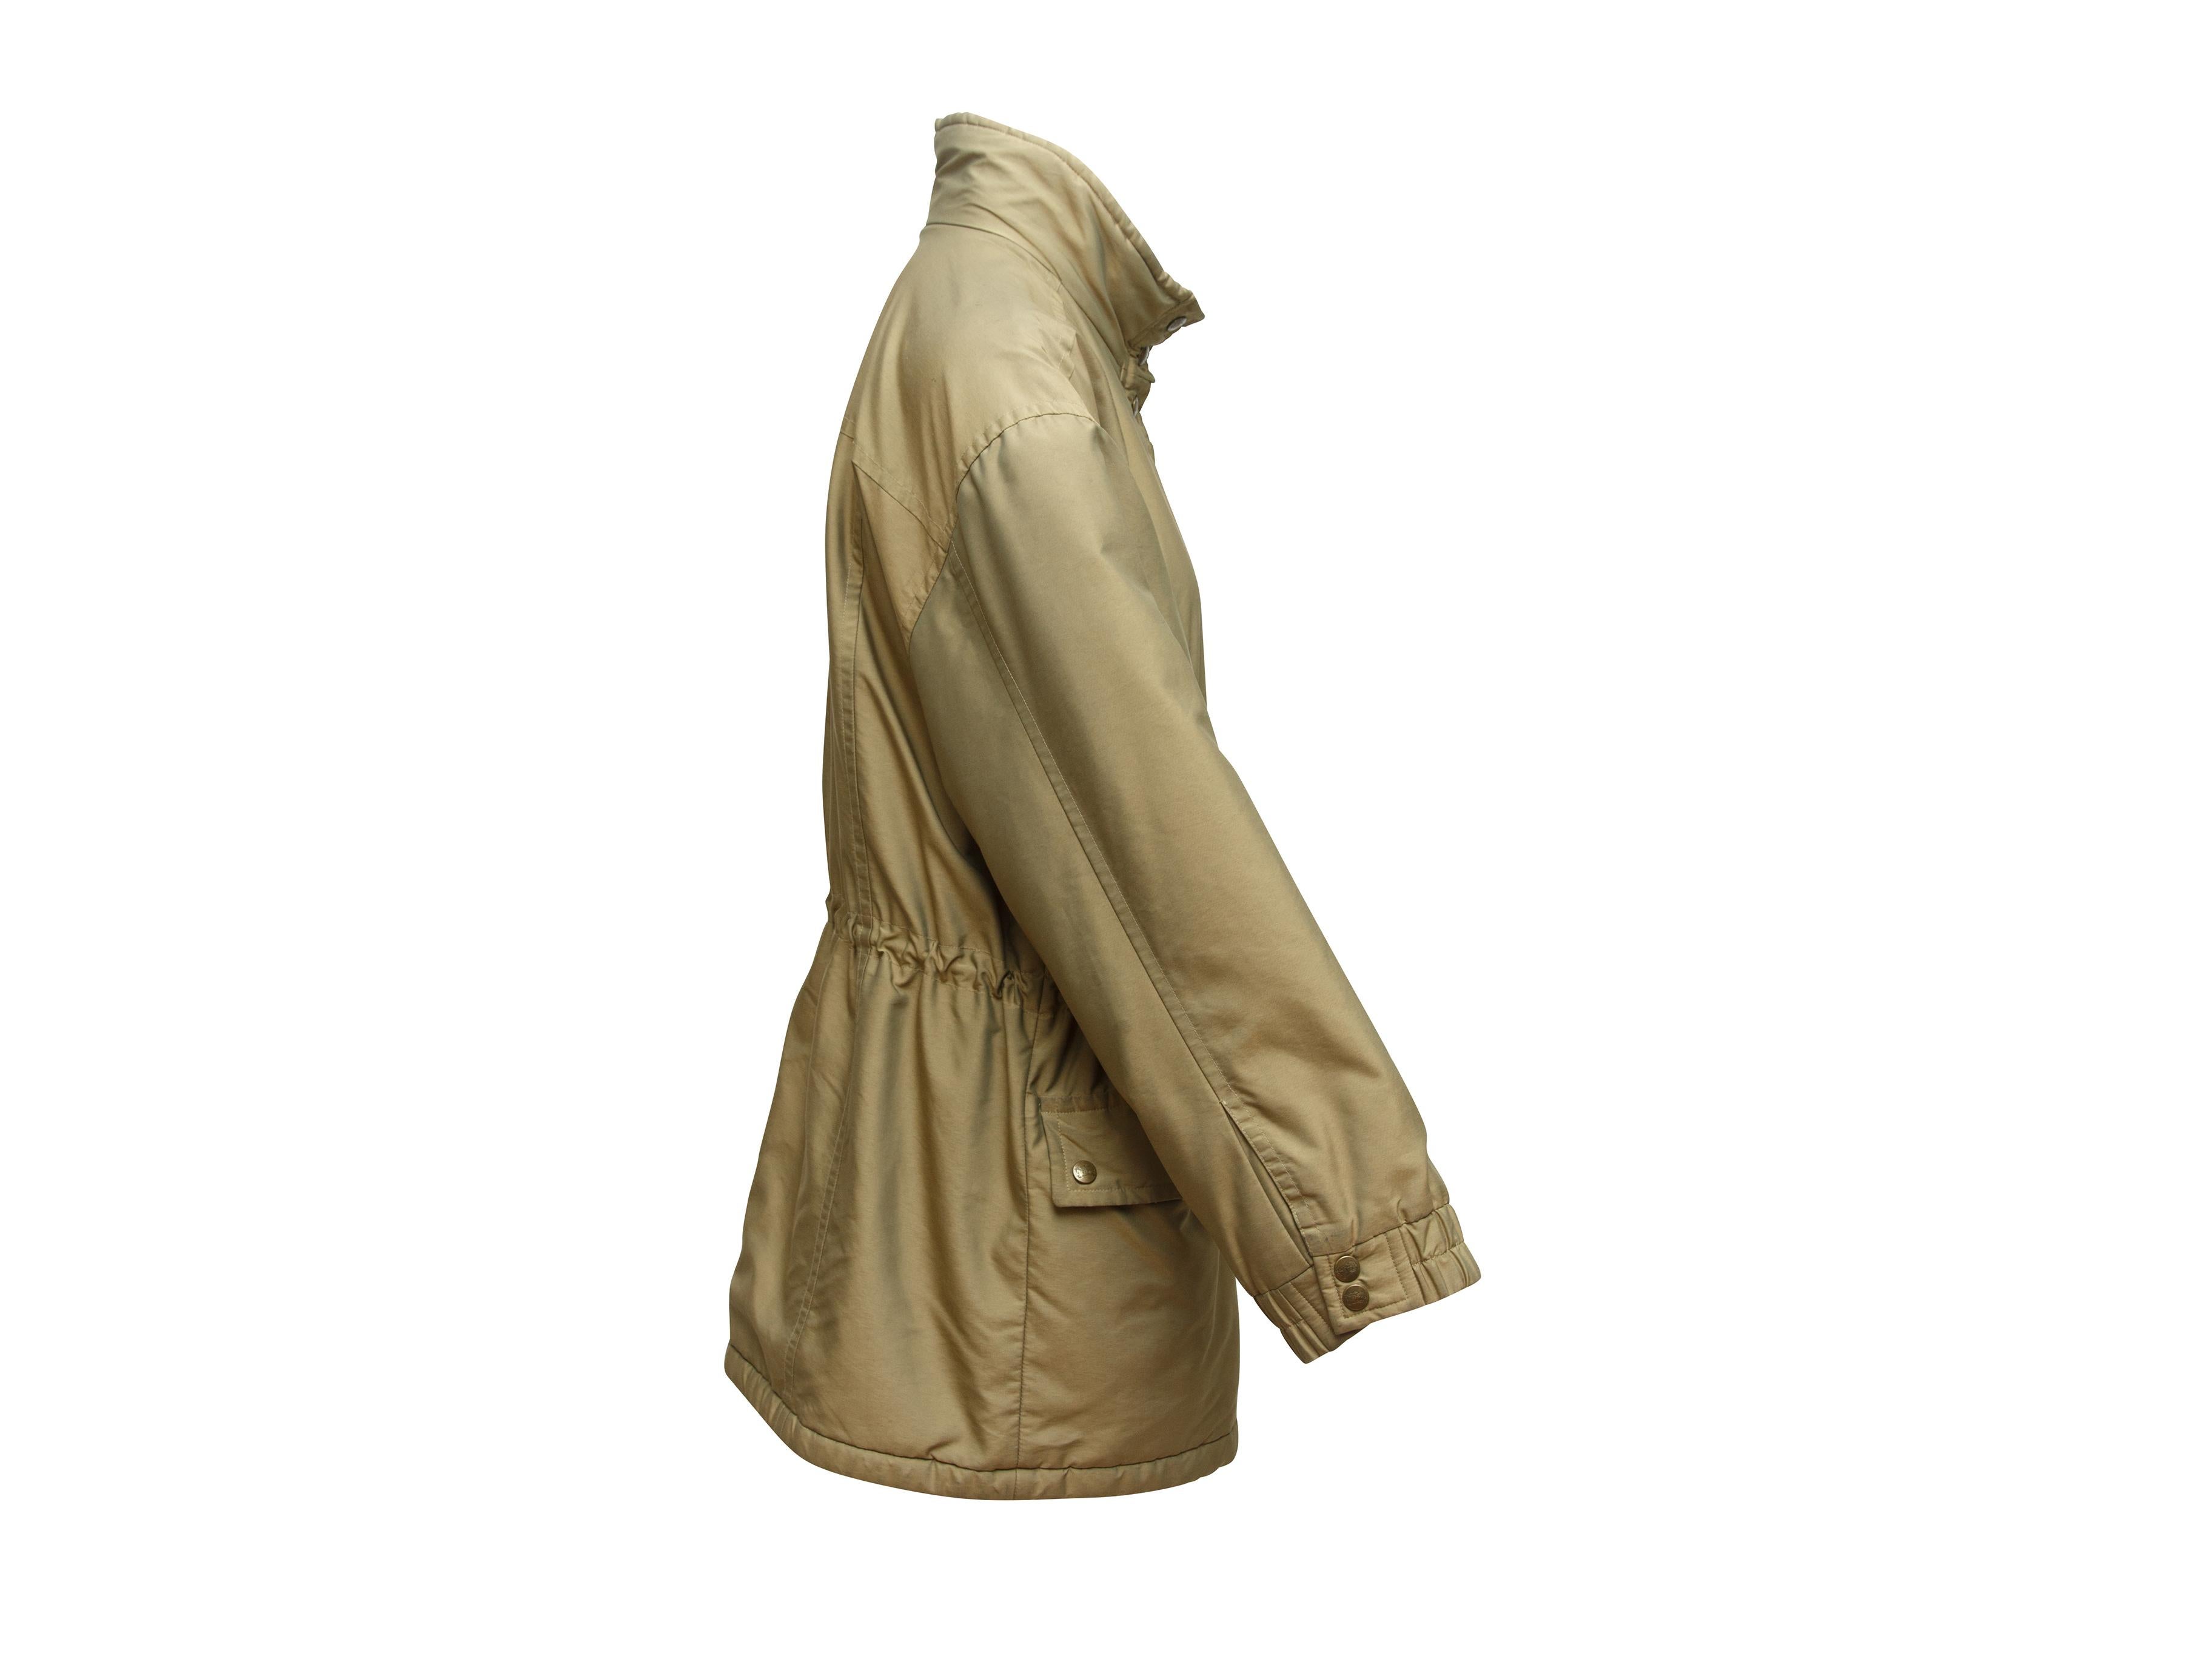 Product details: Vintage tan fleece-lined jacket by Burberry. Dual pockets at hips. Snap closures at front. 41